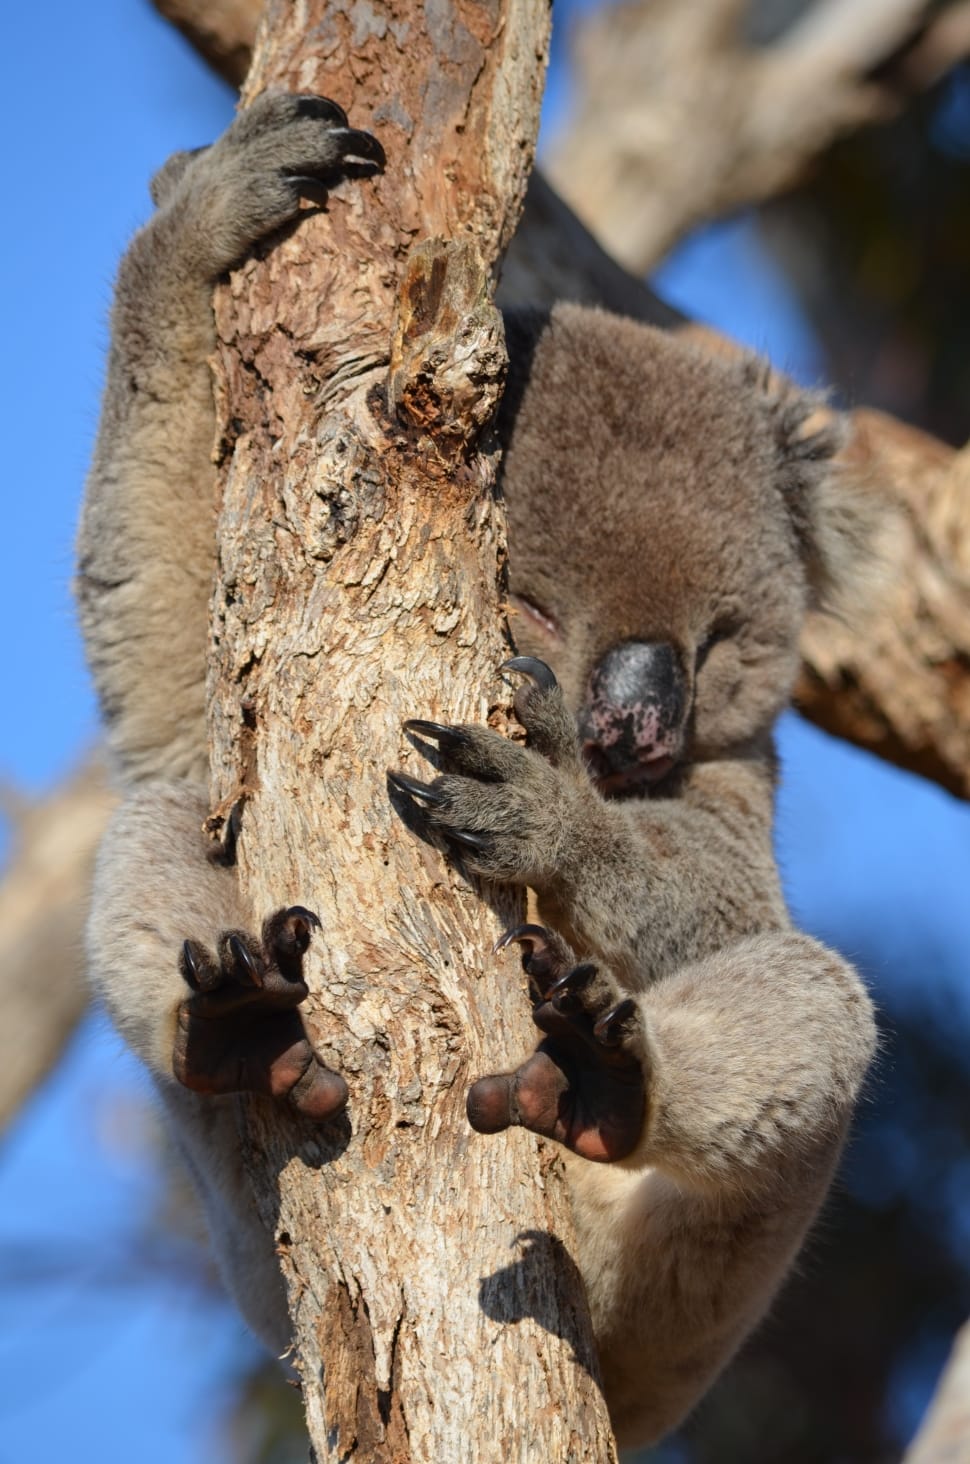 photo of a Koala climbing on tree during daytime preview